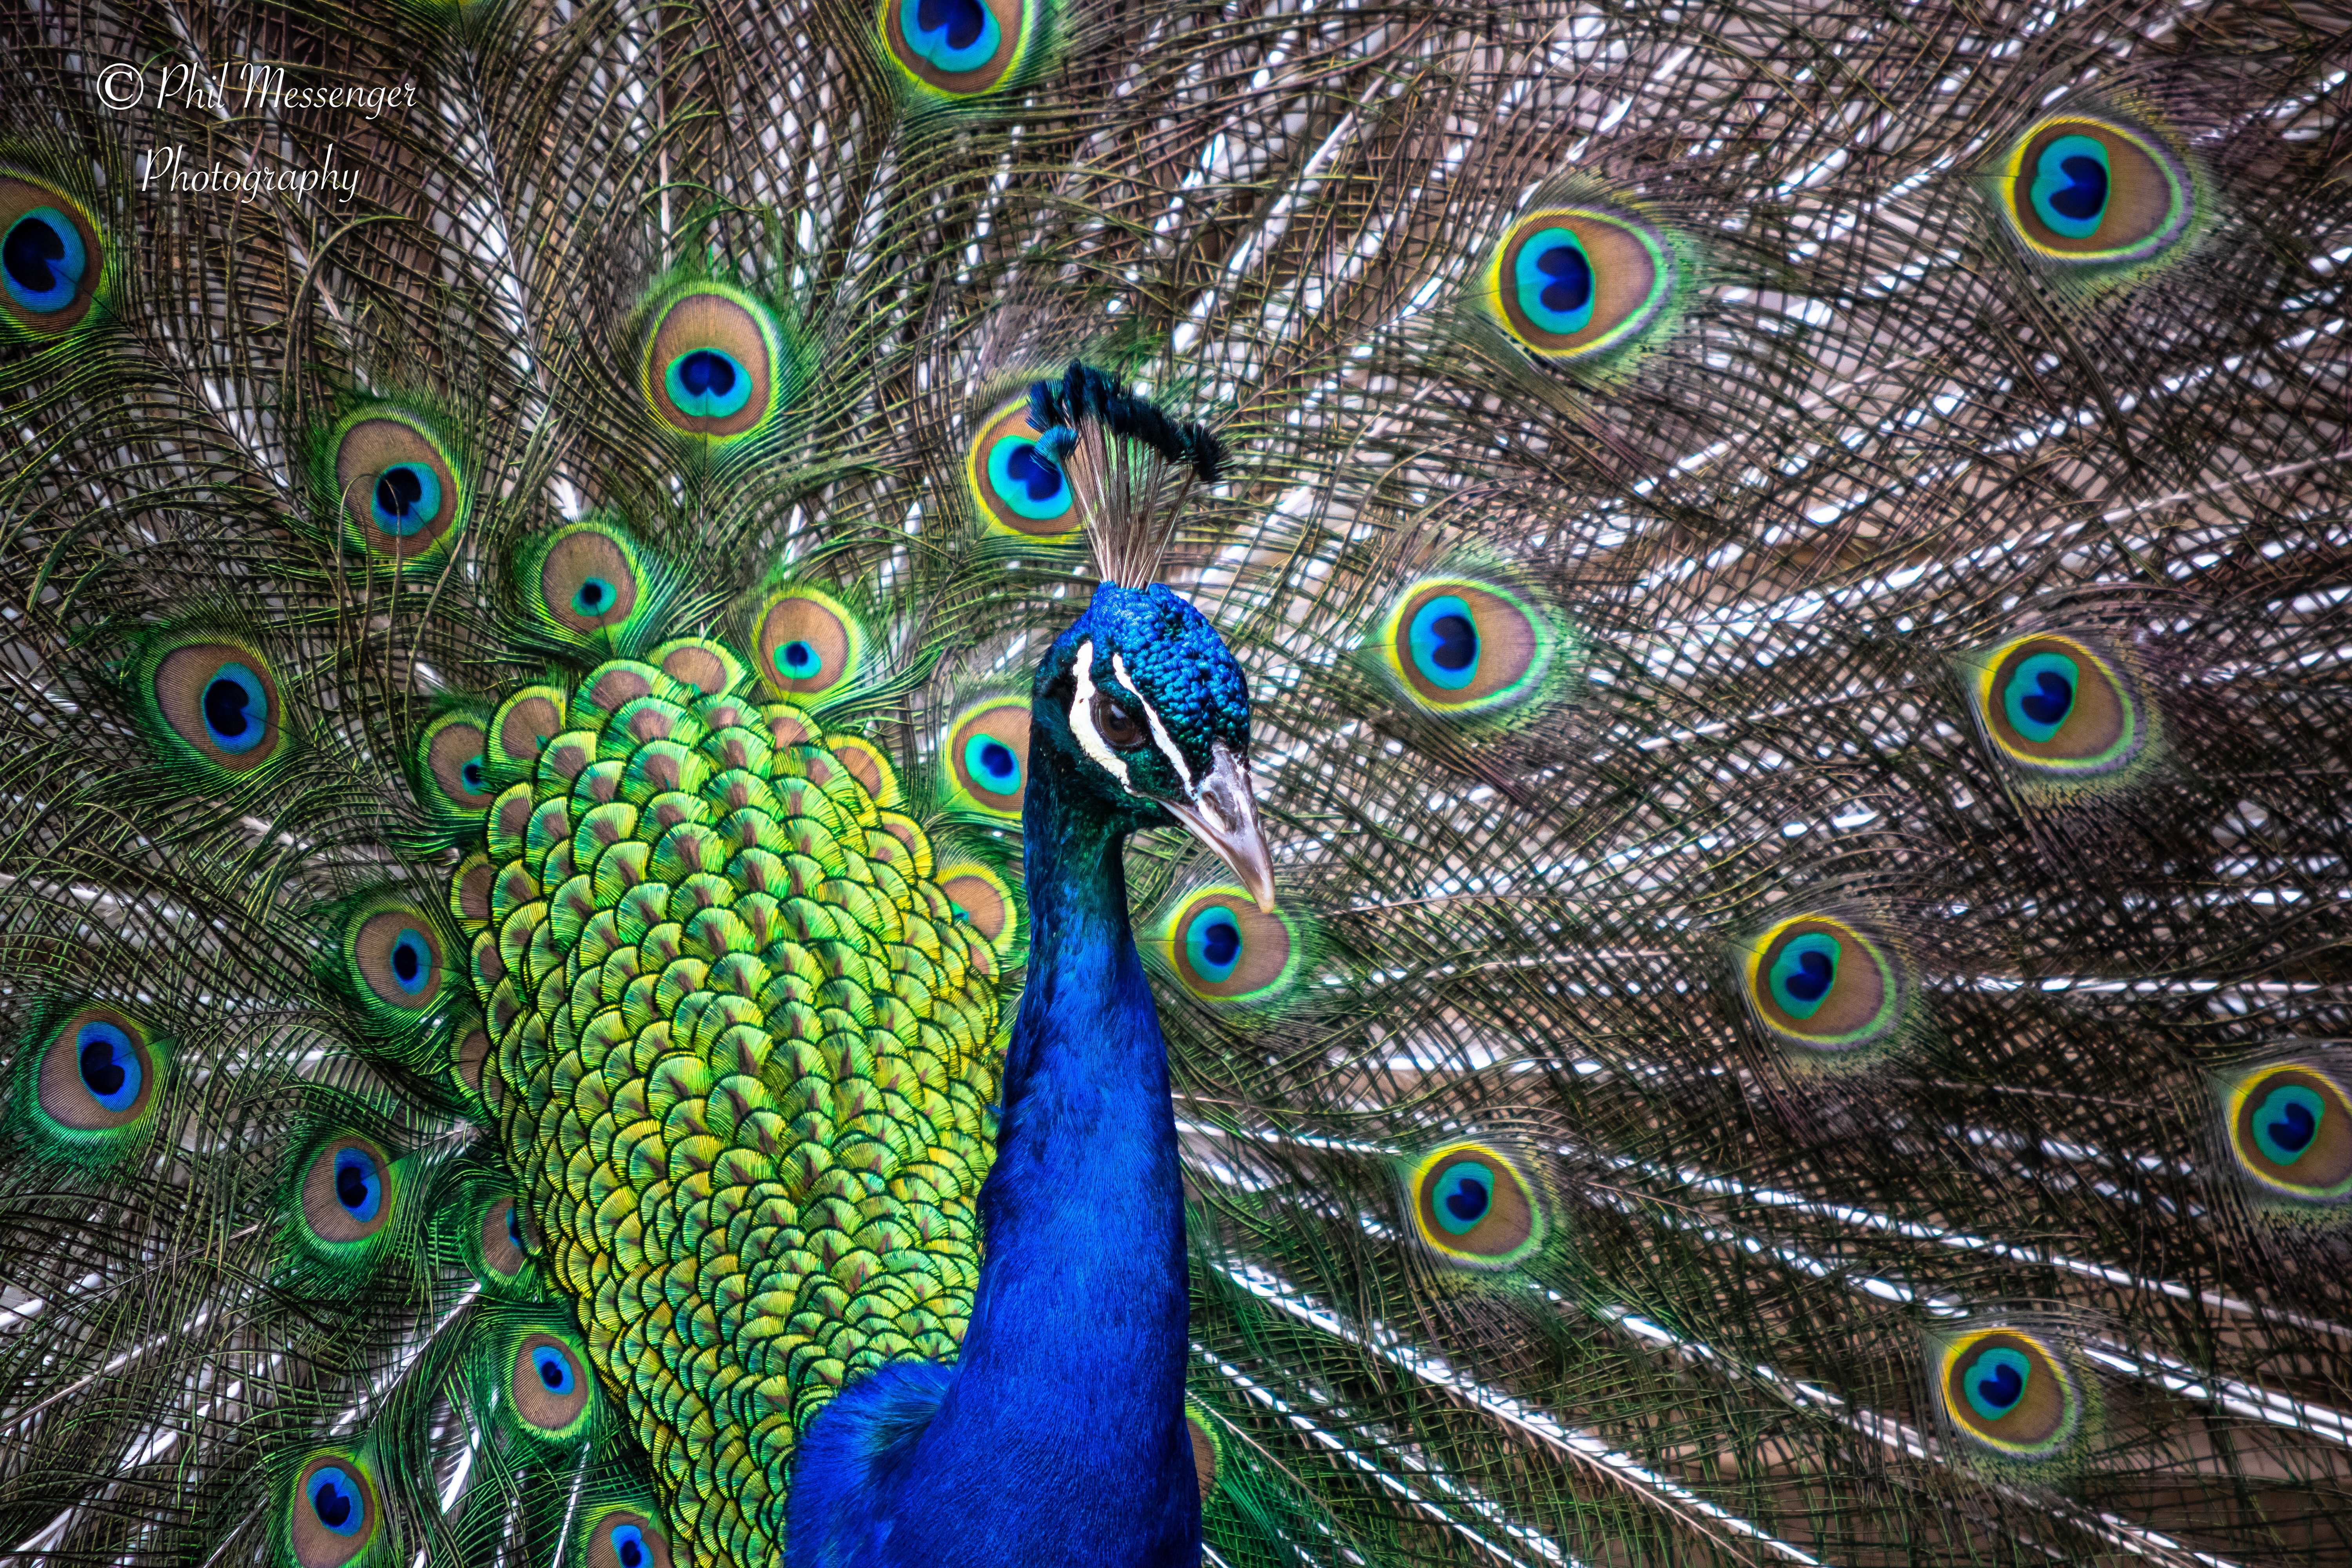 A beautiful Peacock at Cotswold wildlife park today ðŸ™‚